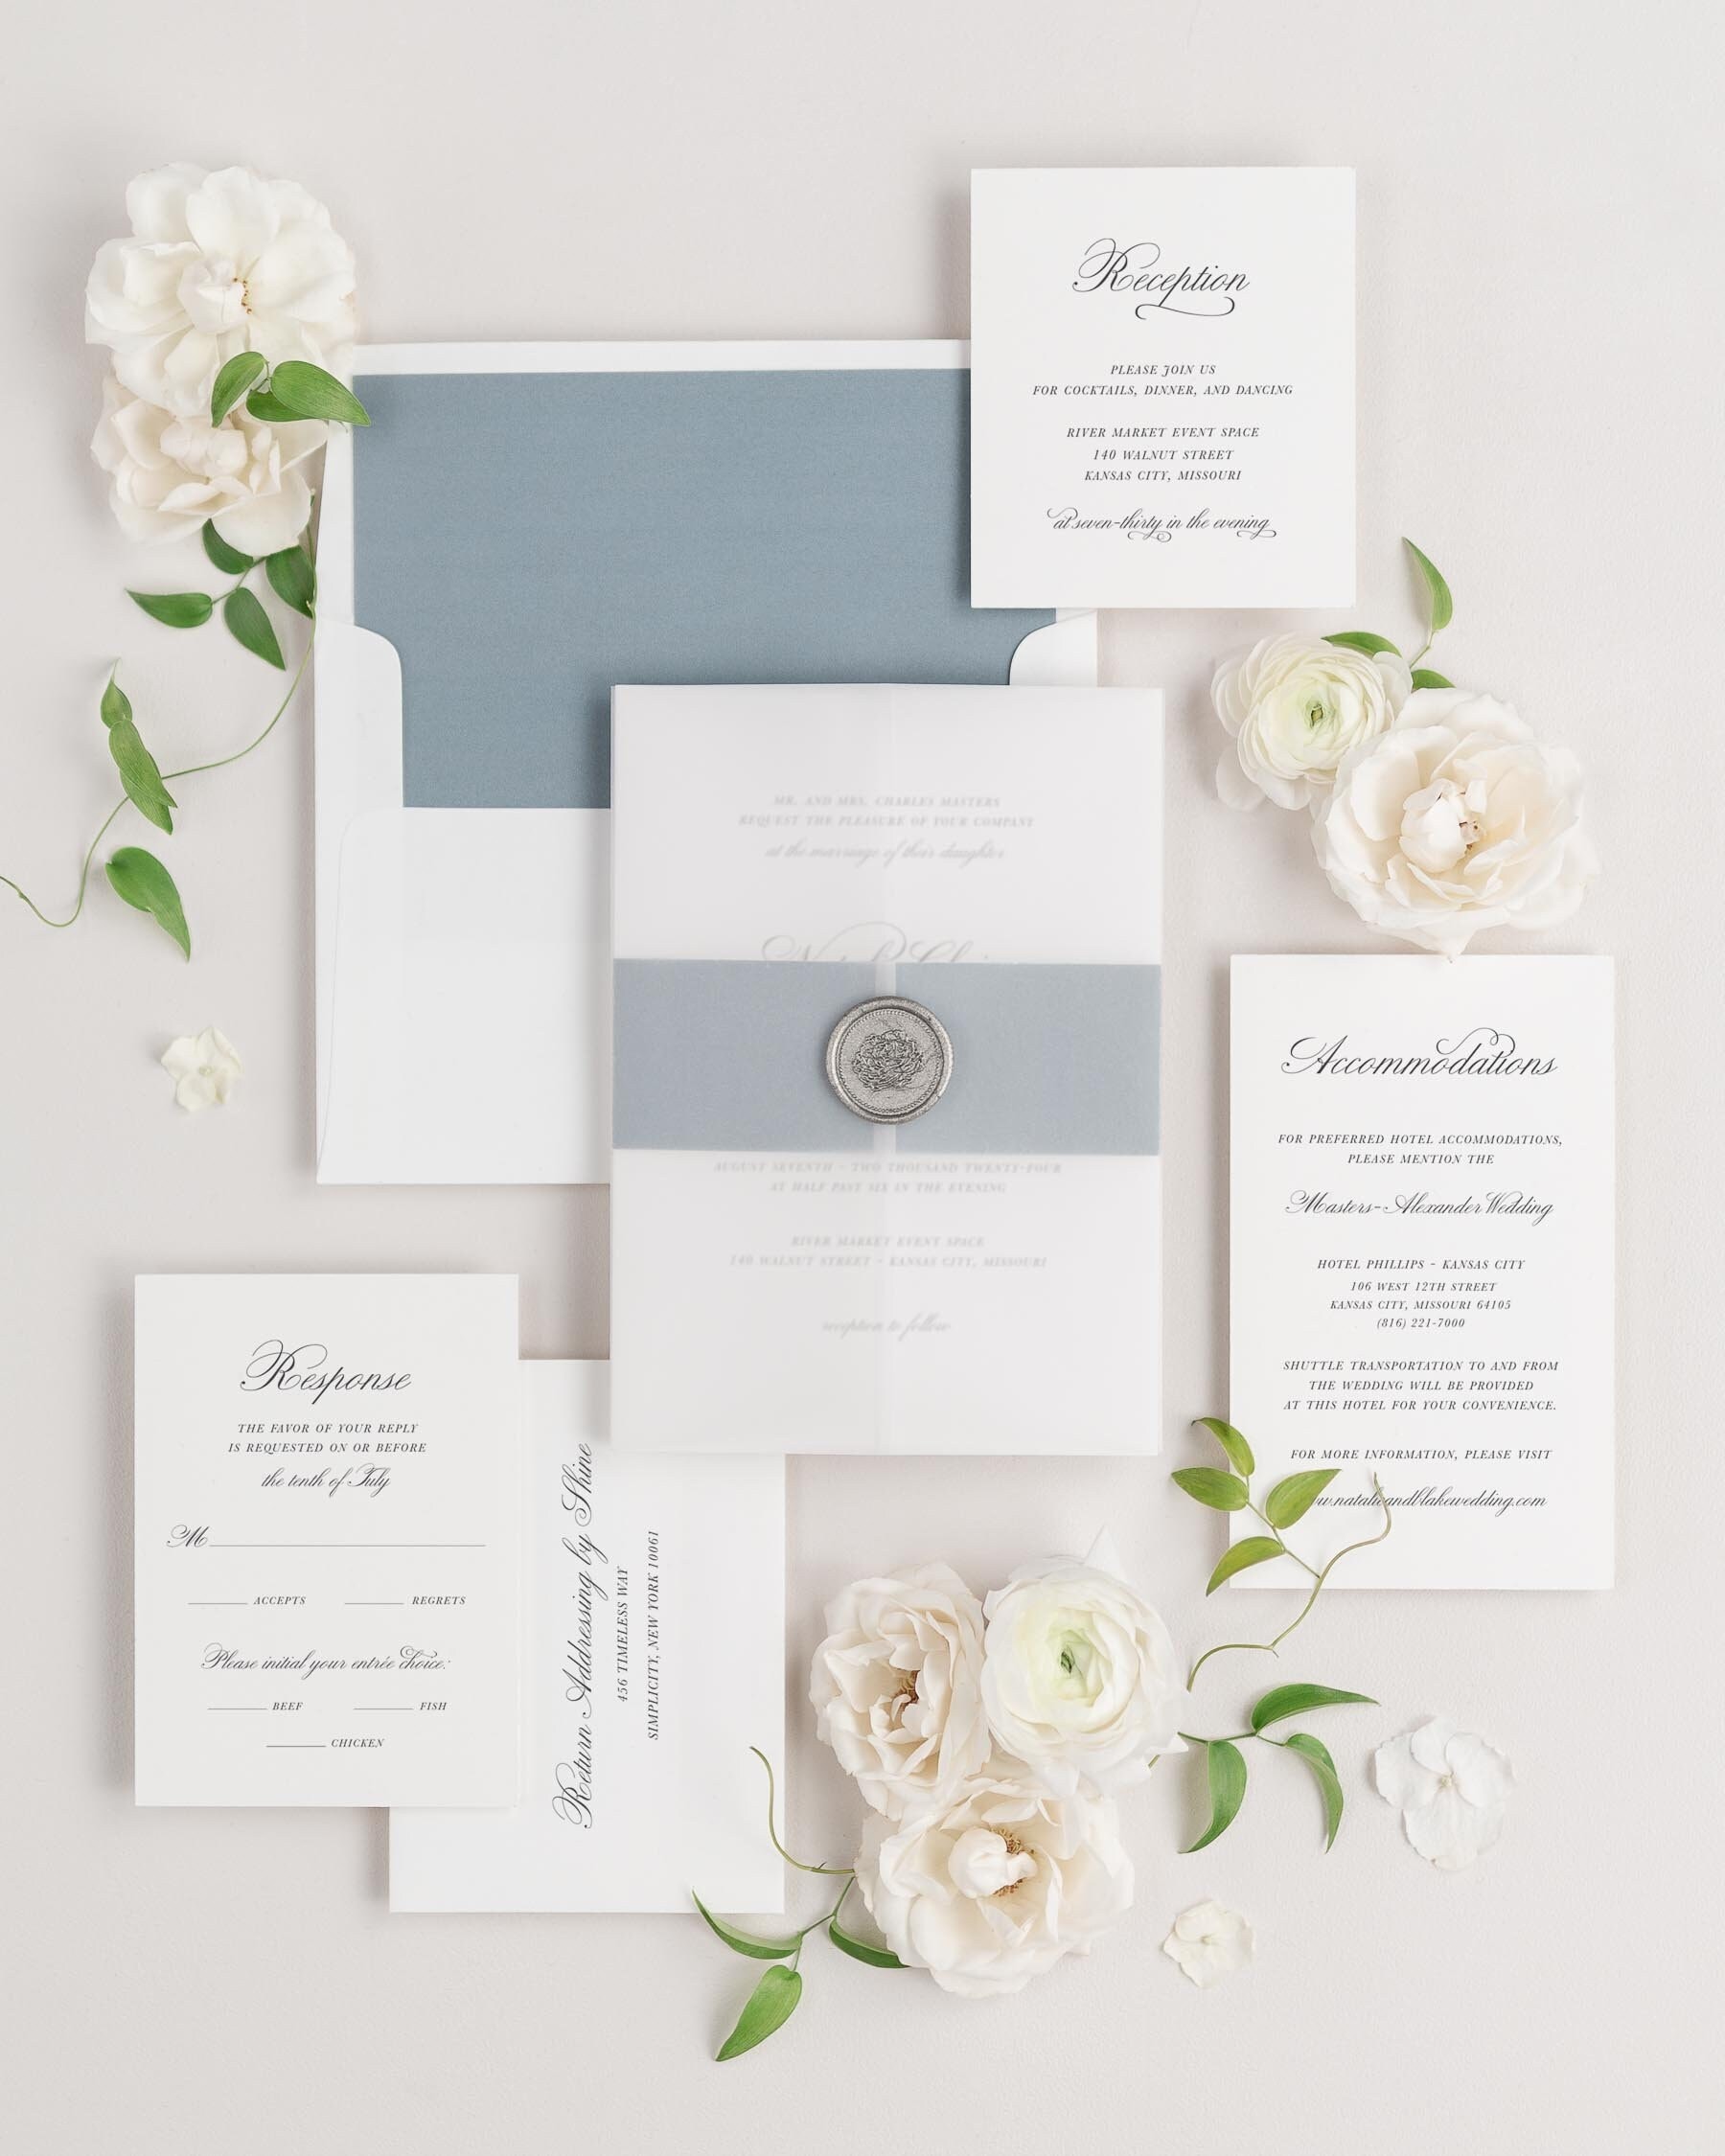 Pin on Wedding Invitations - A mix of Traditional, Unique, Modern and  Classic Styles